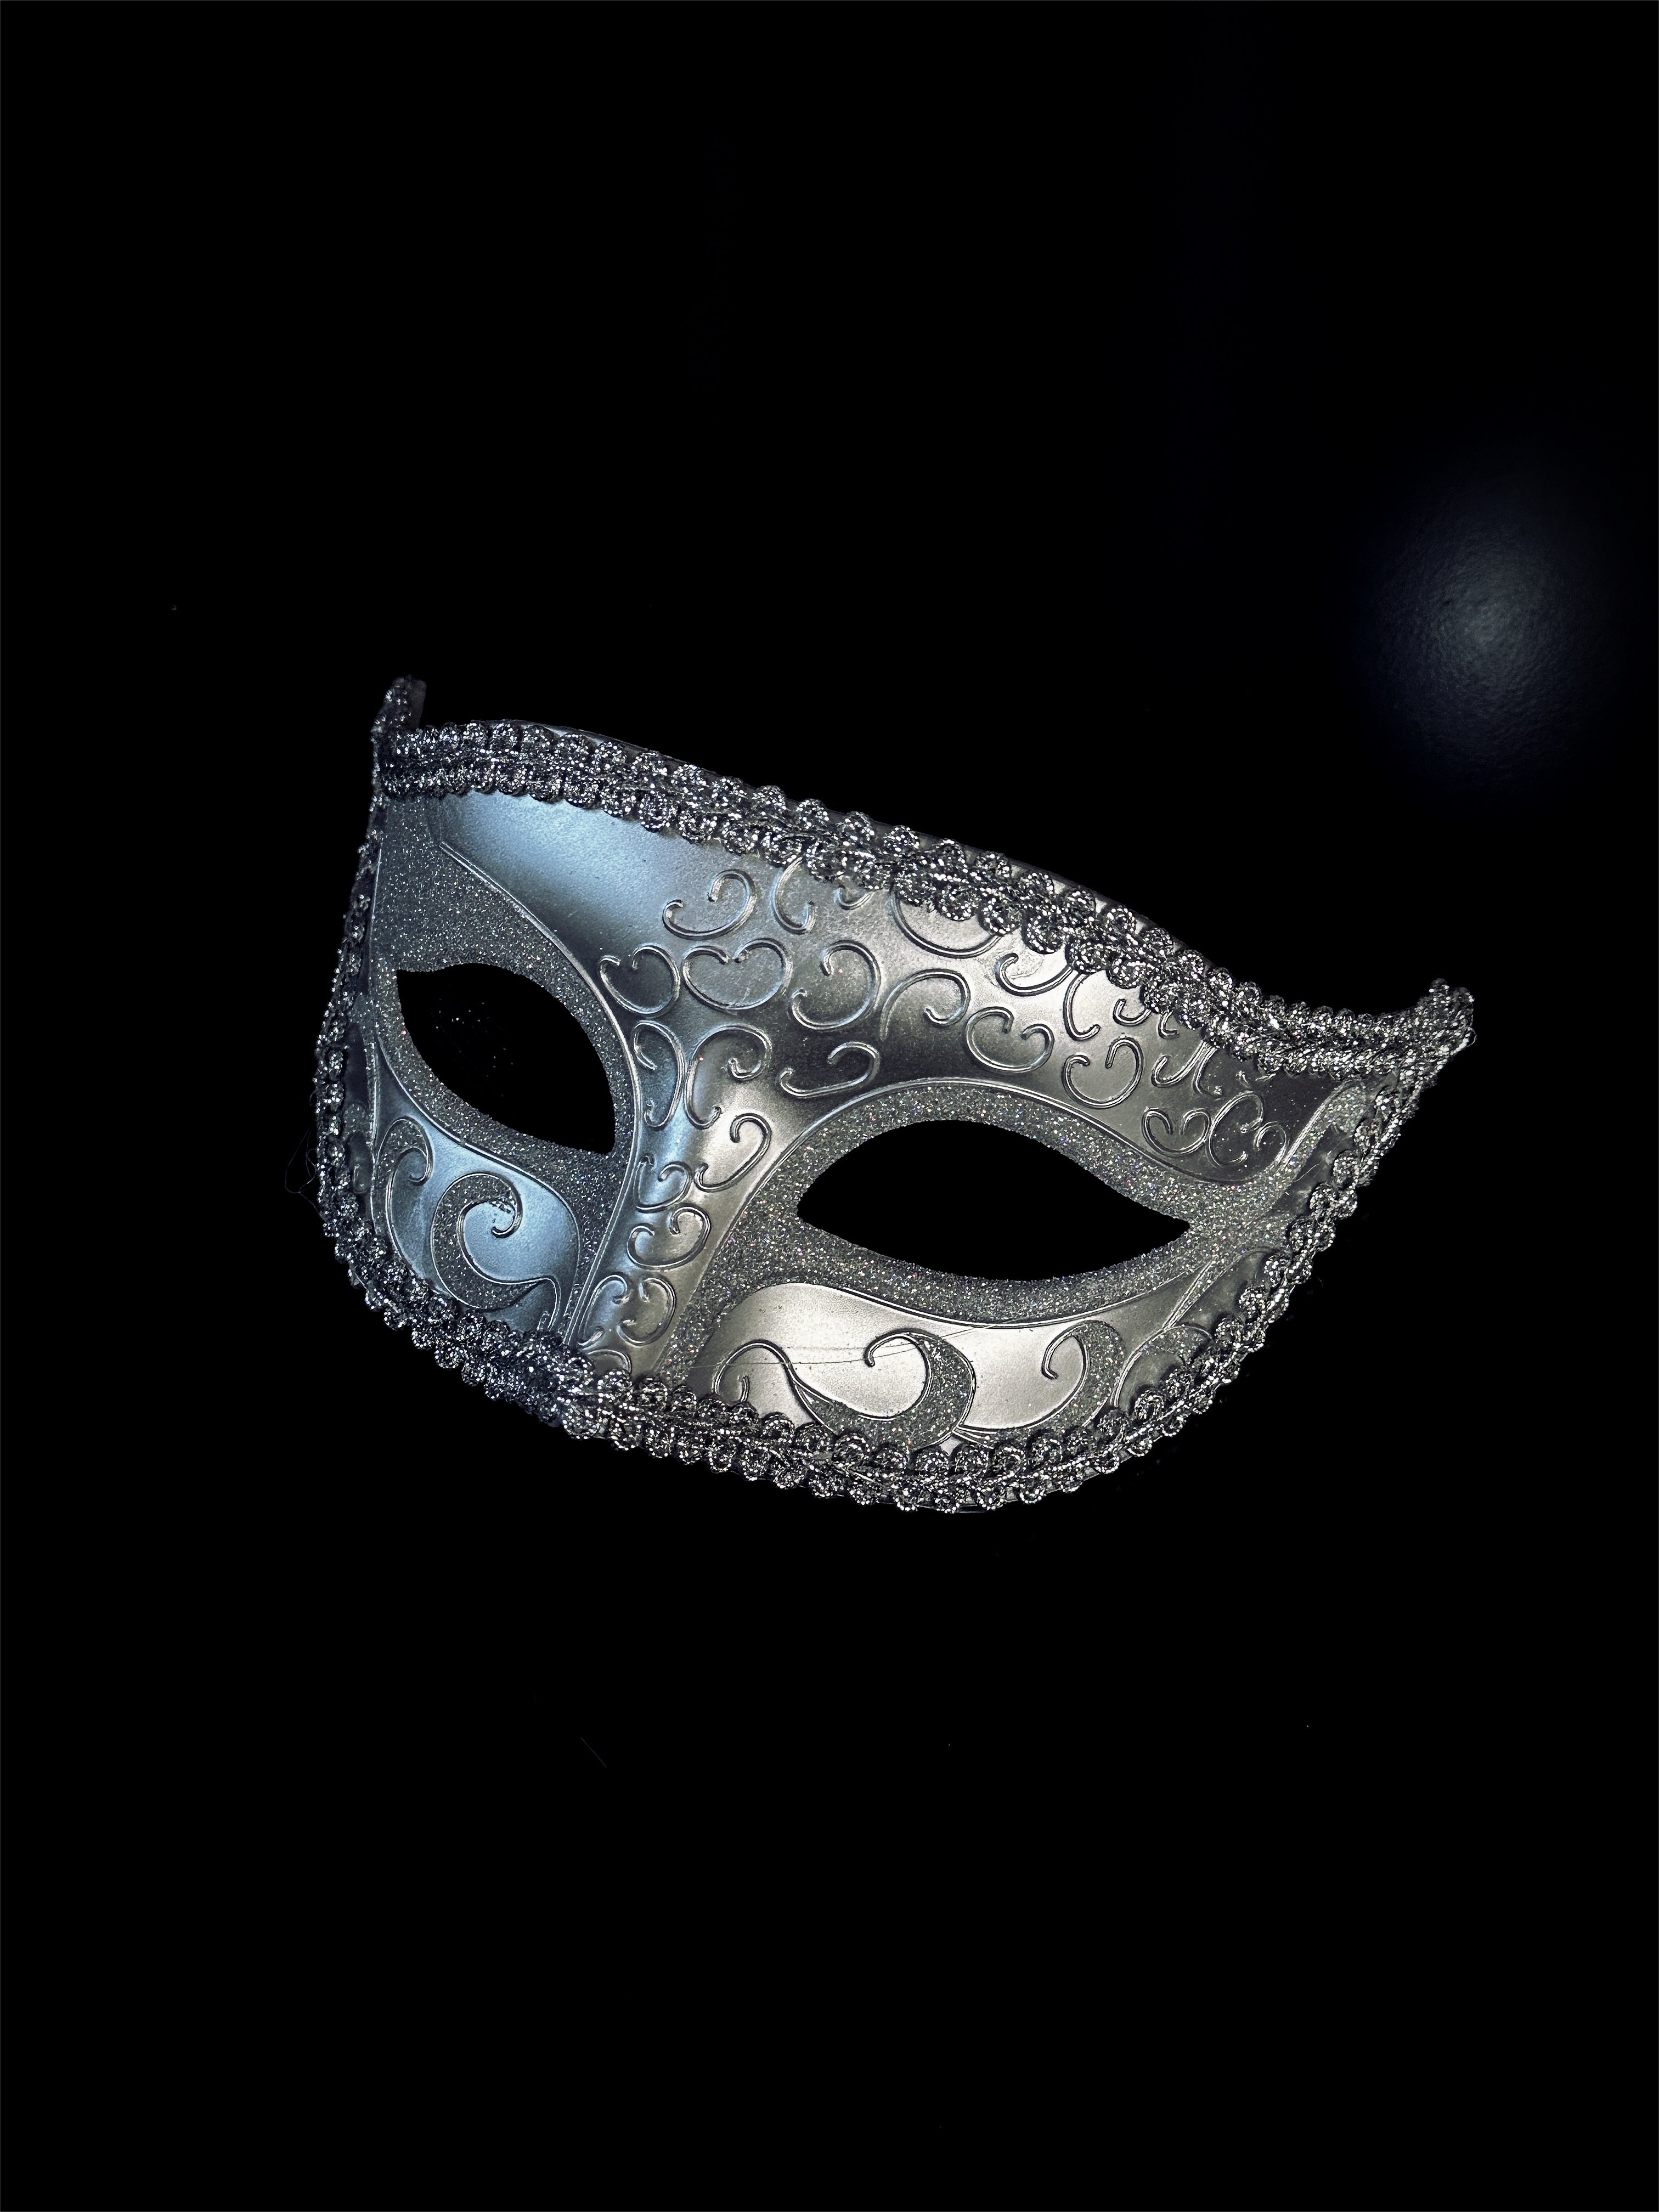 Mens Venetian masquerade mask in silver with silver glitter.